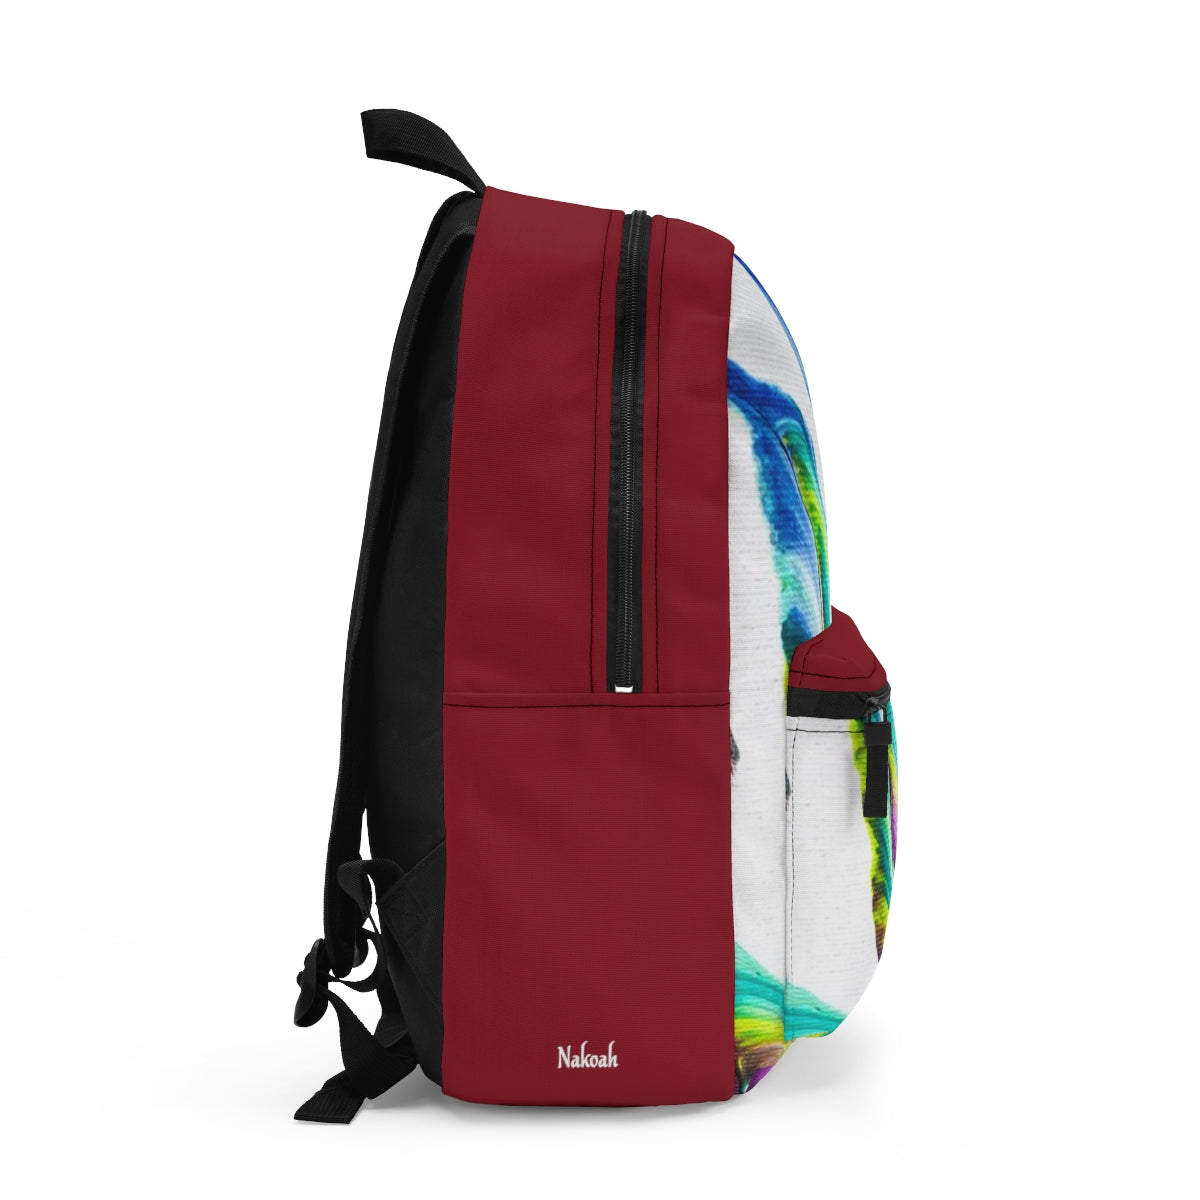 Feathers Backpack (Made in USA)